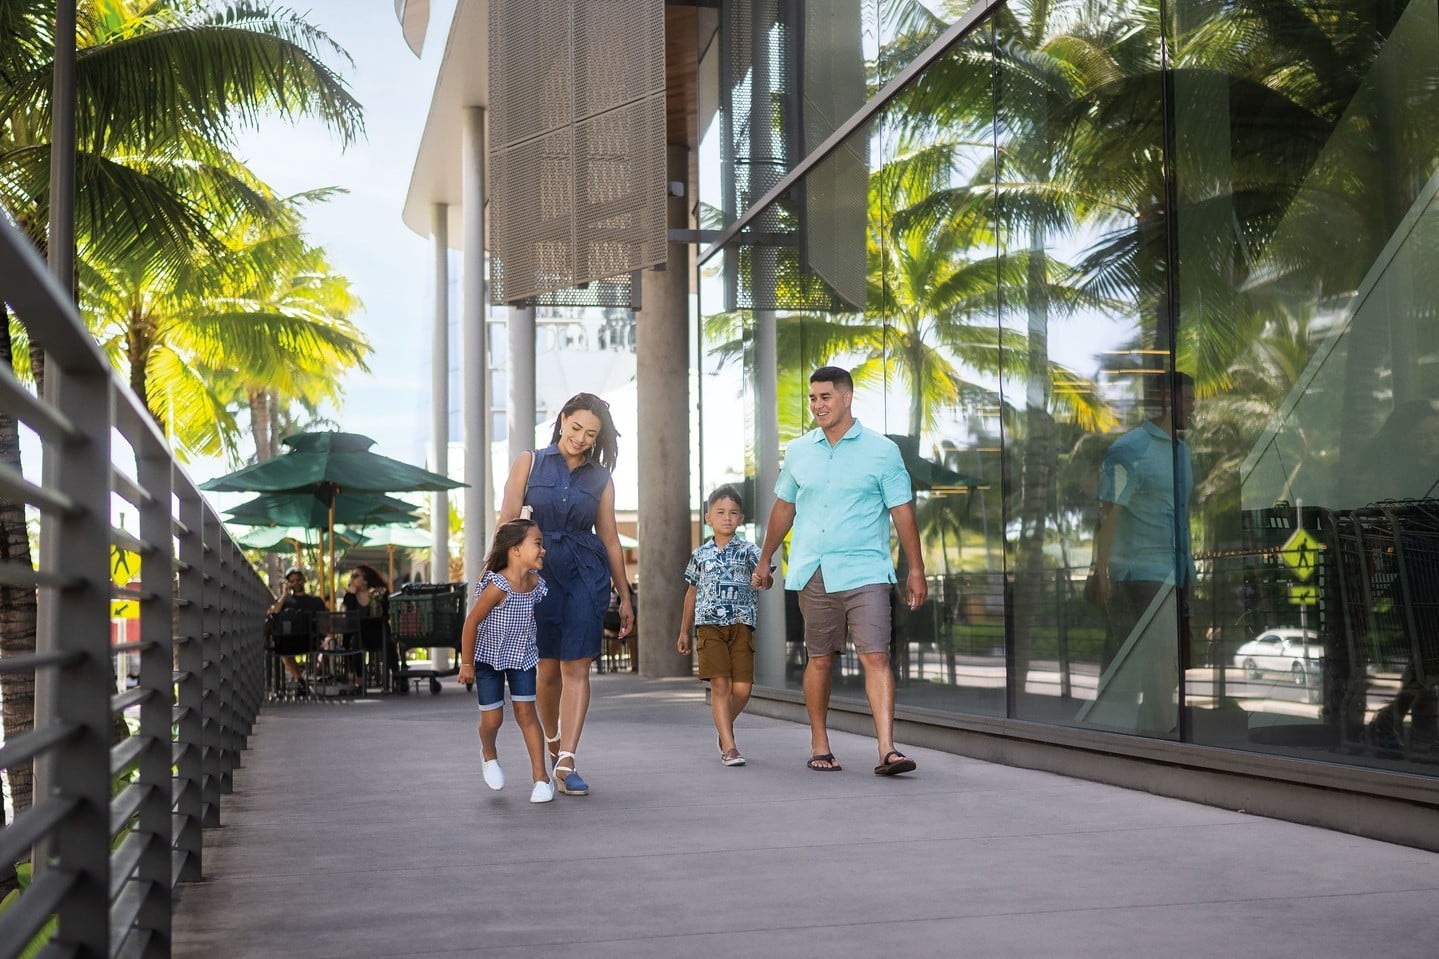 Happy Aloha Friday! Stroll the tree-lined sidewalks, uncover a new boutique and delight in a variety of dining options. At Ward Village you can spend more time doing the things you love.